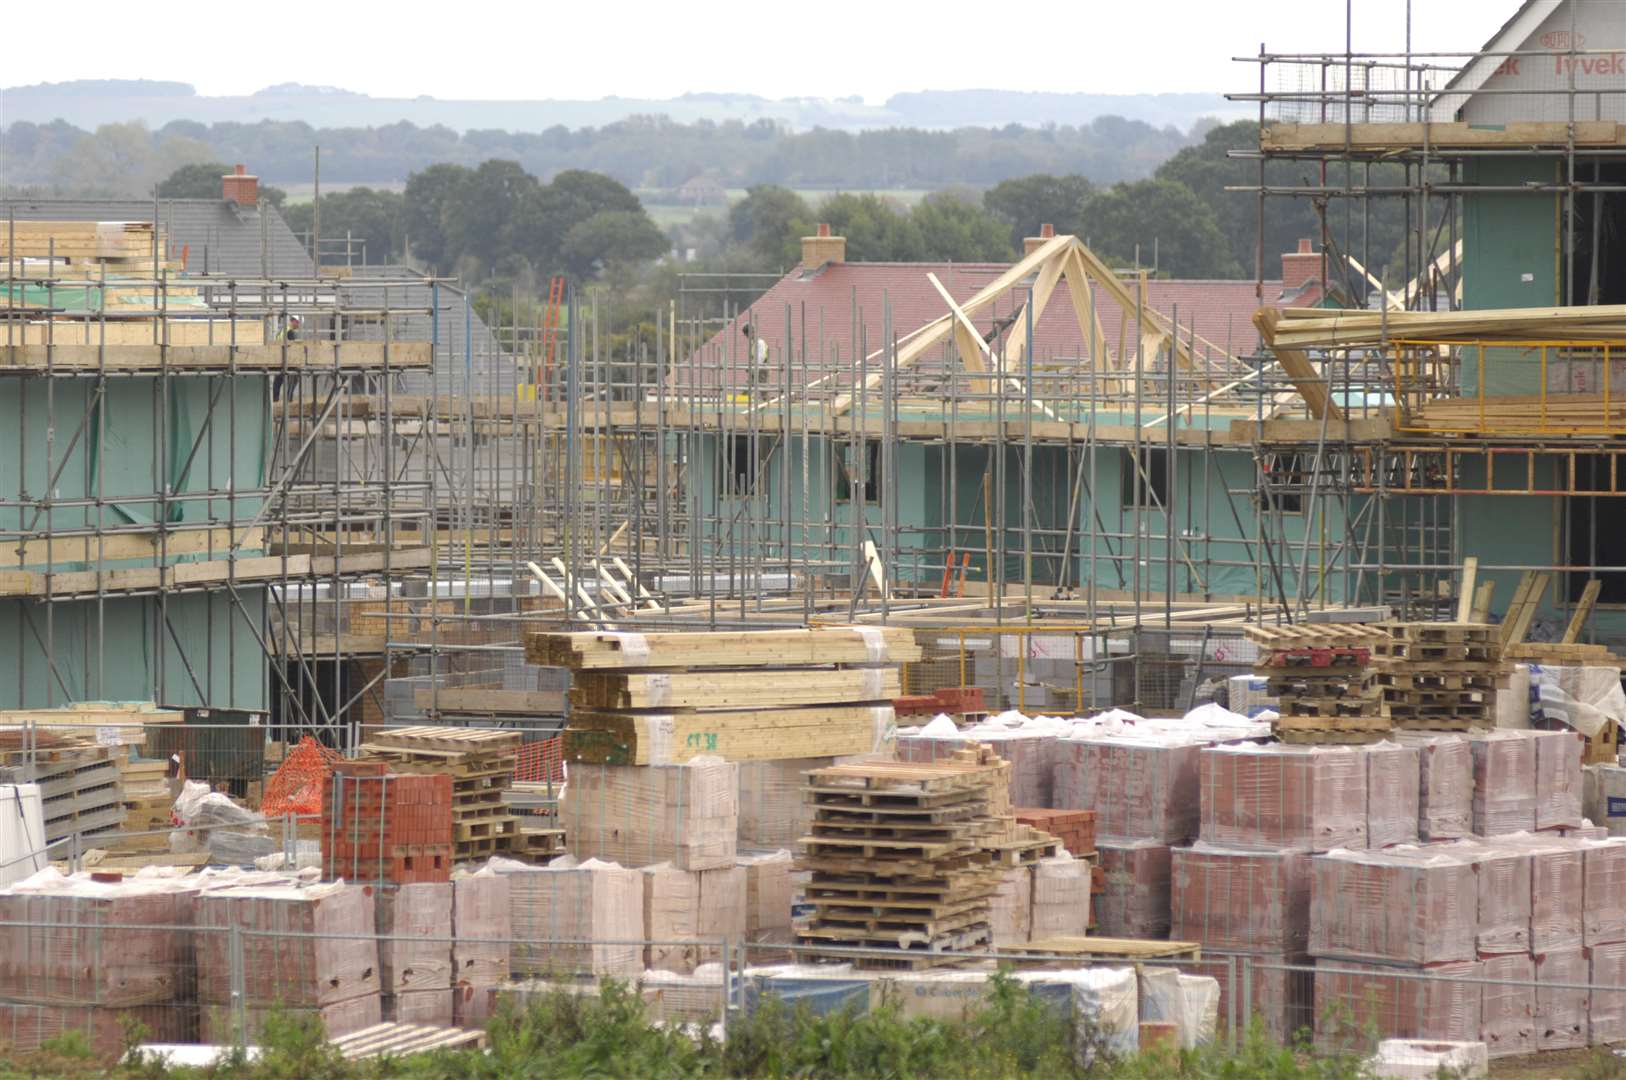 Thanet council has 'persistently failed' to deliver new housing in the district, the housing secretary James Brokenshire said